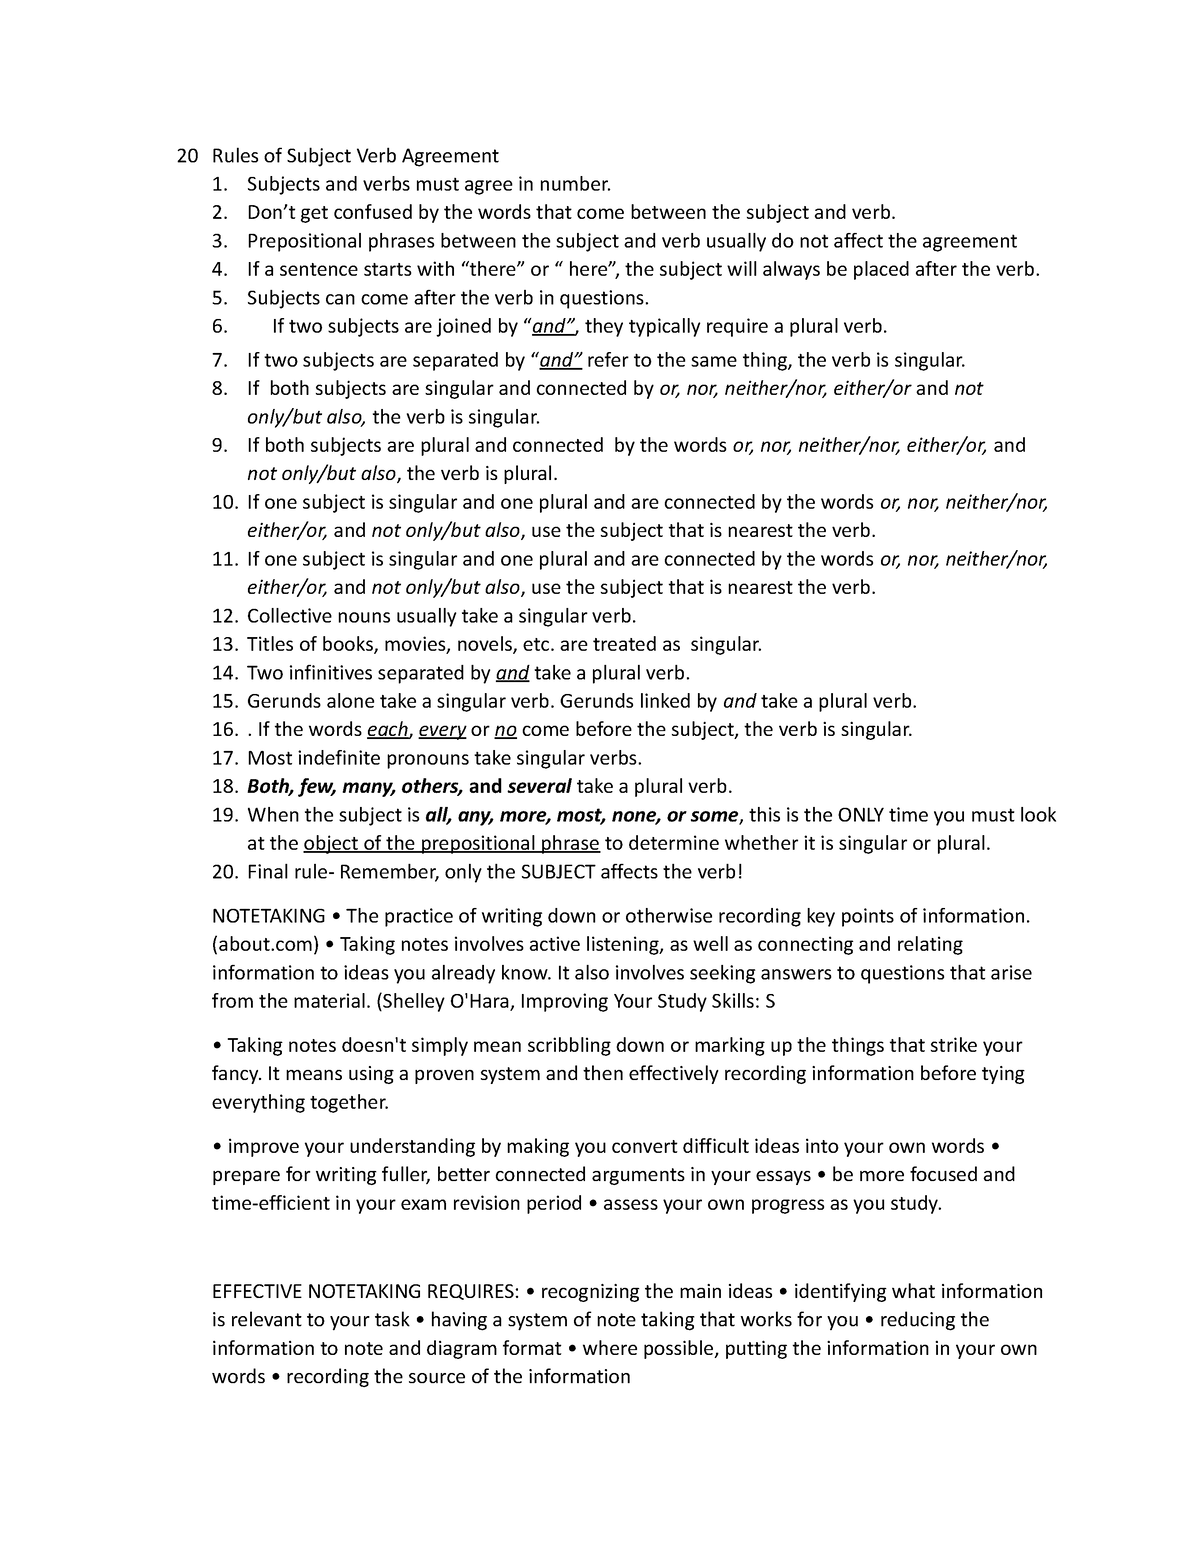 Rules of Subject Verb Agreement note taking - 20 Rules of Subject Verb ...